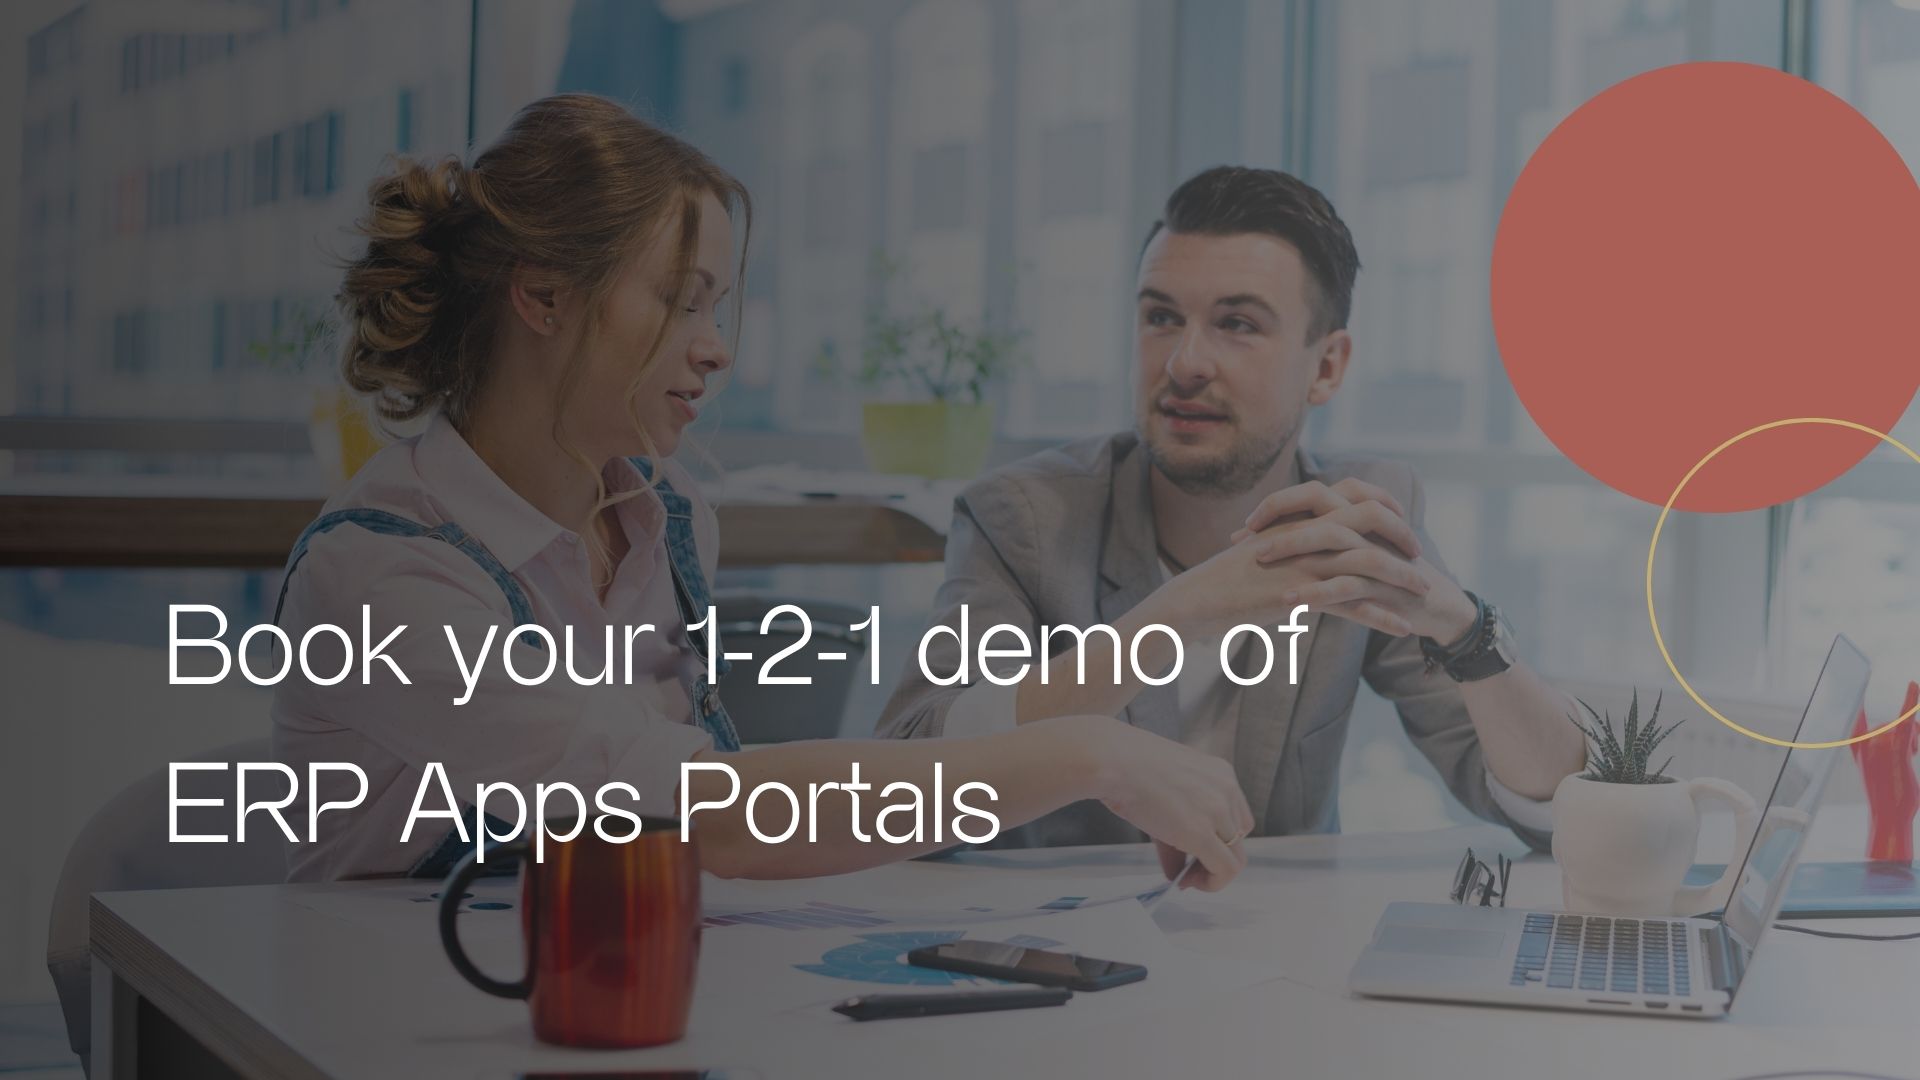 Book your 1-2-1 demo of ERP Apps Portals